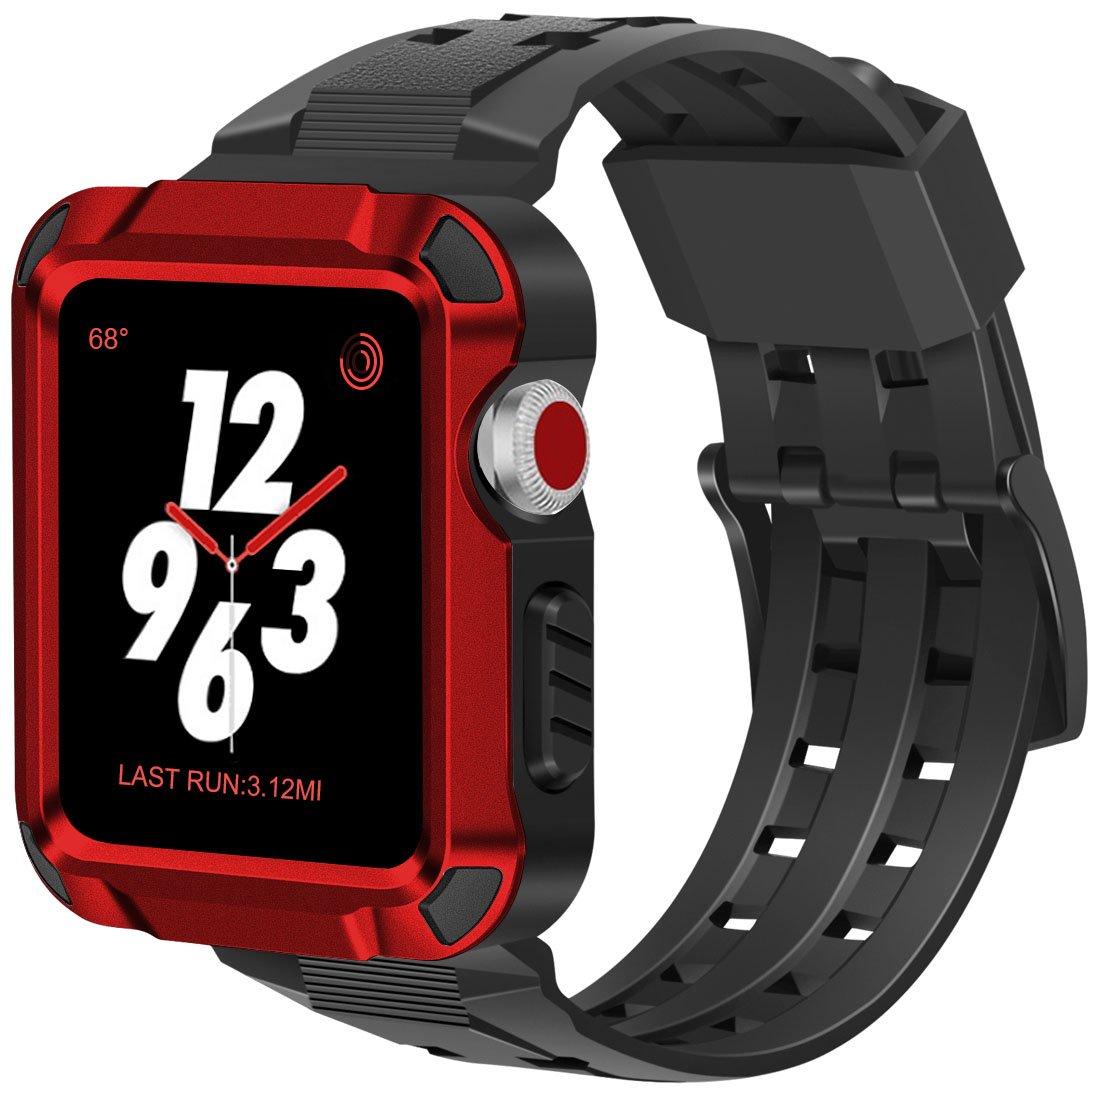 Book Cover iiteeology Compatible with Apple Watch Band 42mm, Men Metal Rugged Apple Watch Case with Sports Breathable iWatch Bands for Apple Watch 42mm Series 3 Series 2 Series 1-Red